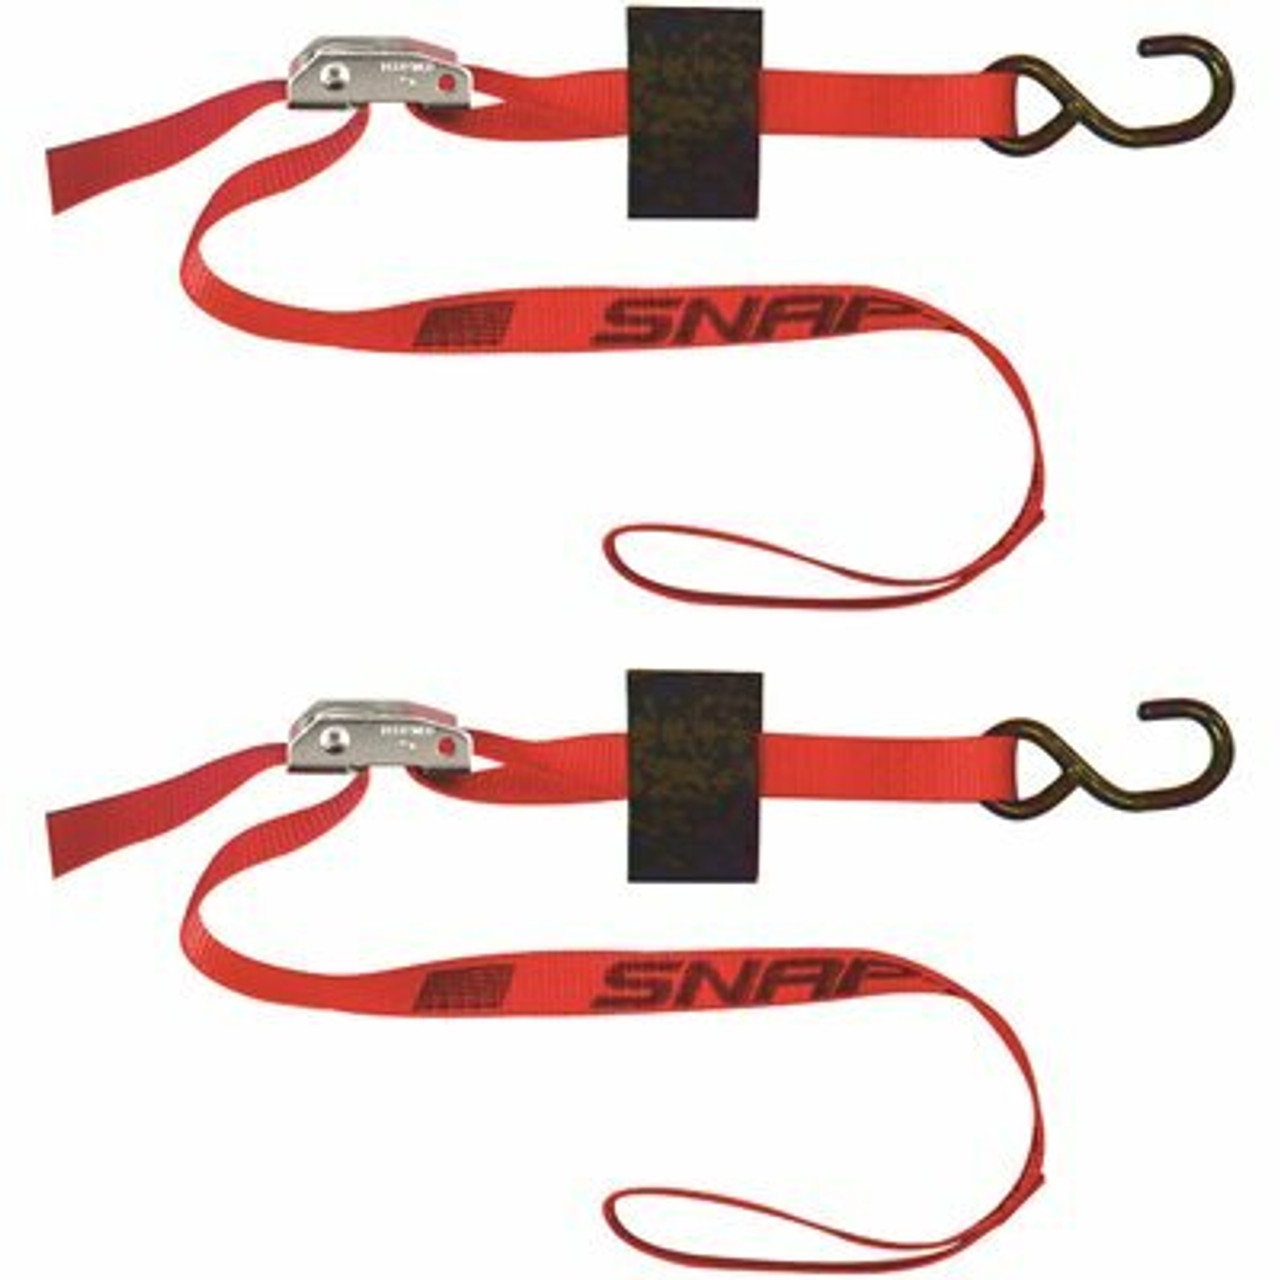 Snap-Loc 4 Ft. X 1 In. S-Hook Cam Strap With Hook And Loop Storage Fastener In Red (2-Pack)